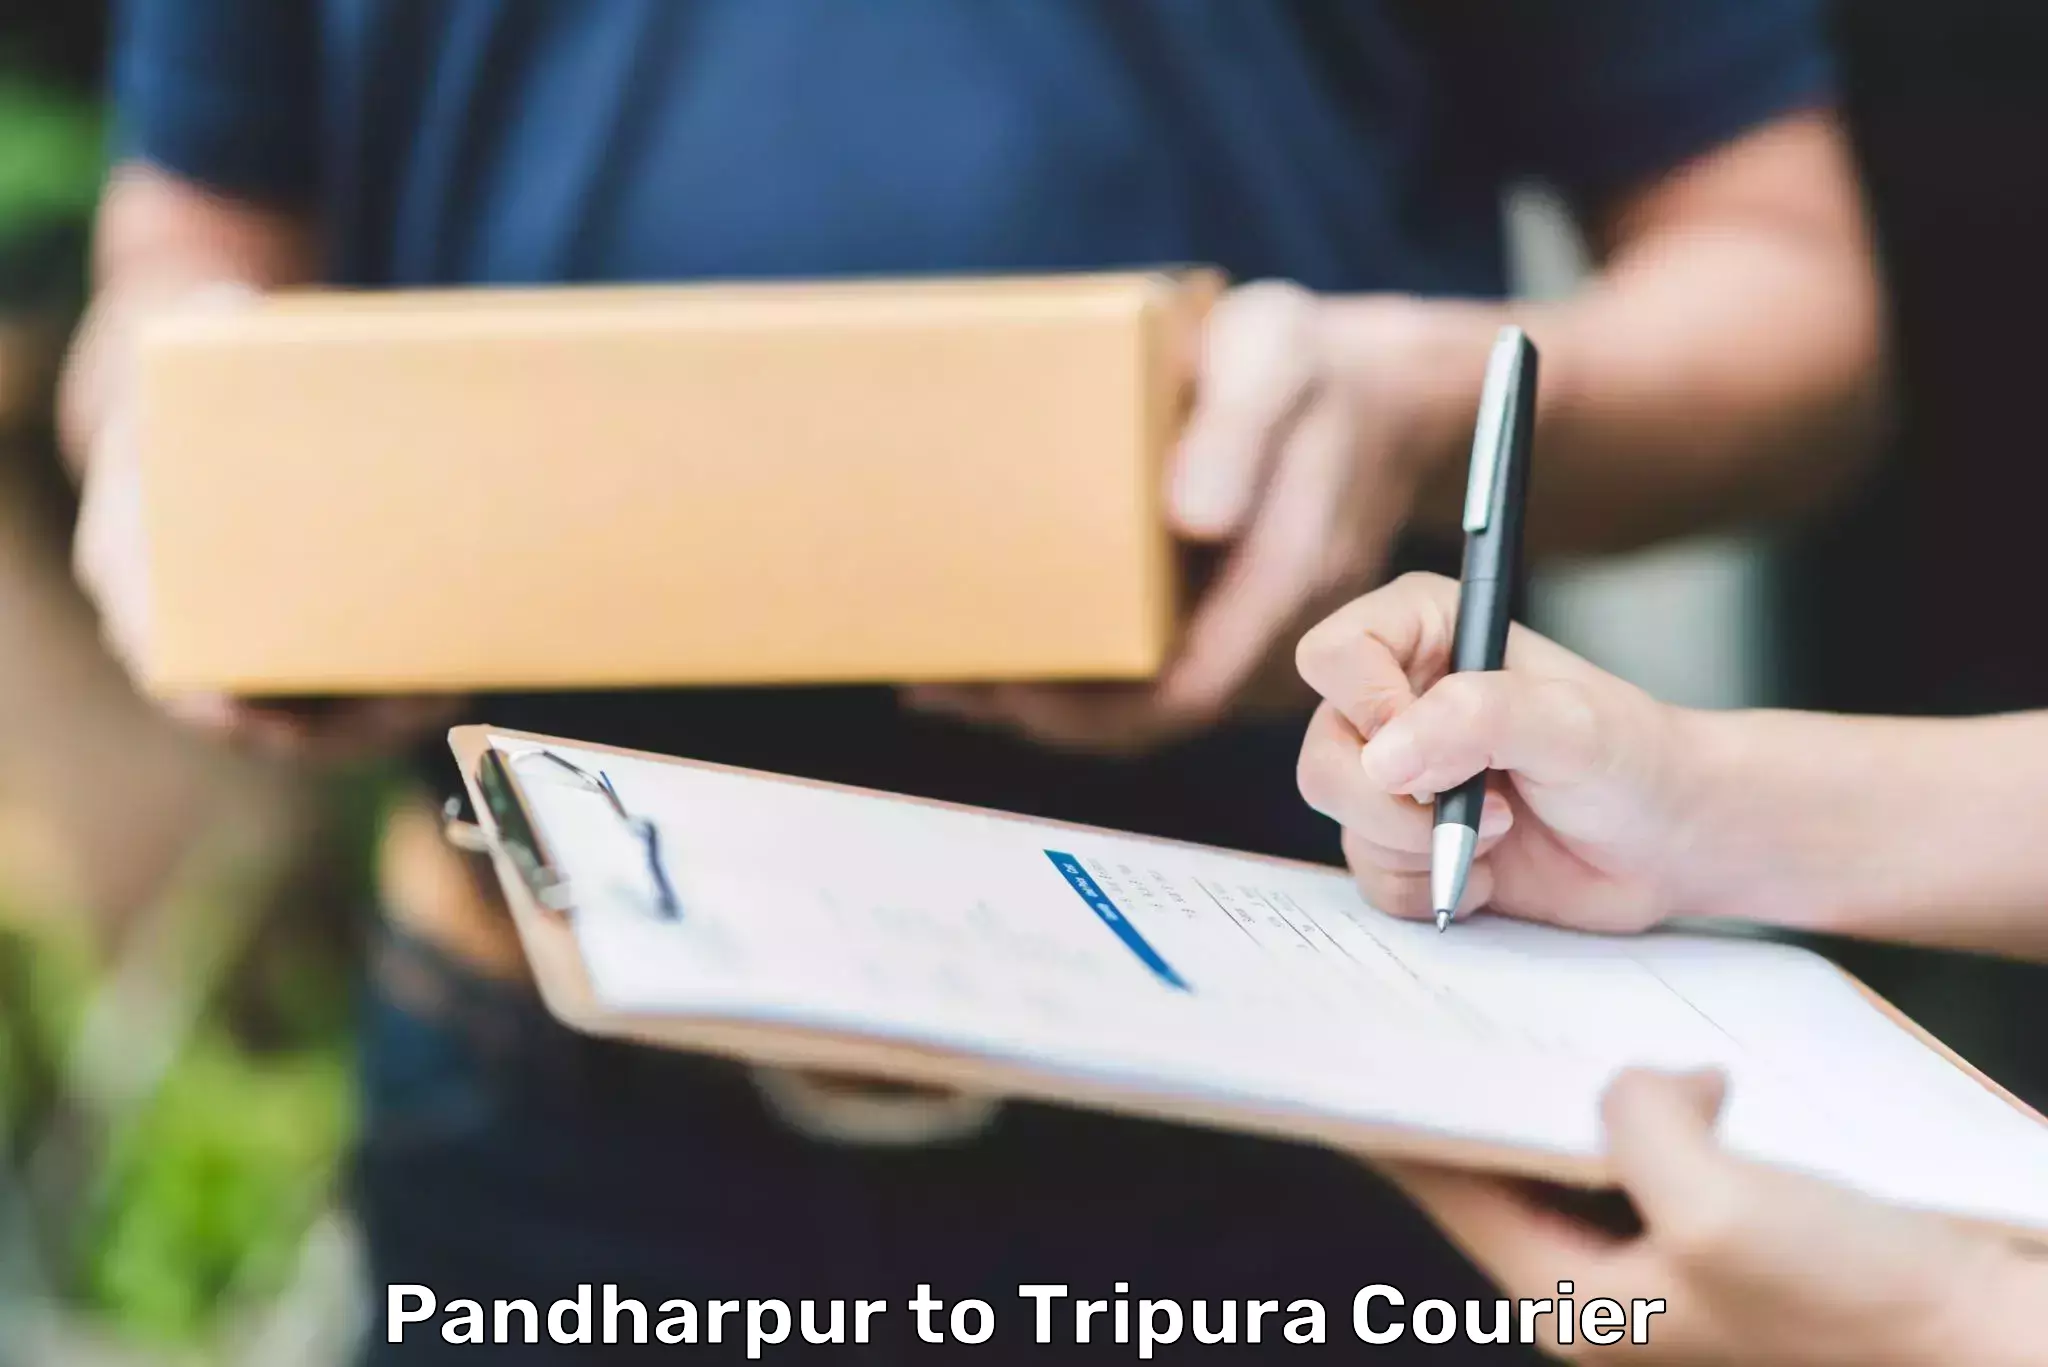 Personalized courier experiences Pandharpur to Udaipur Tripura